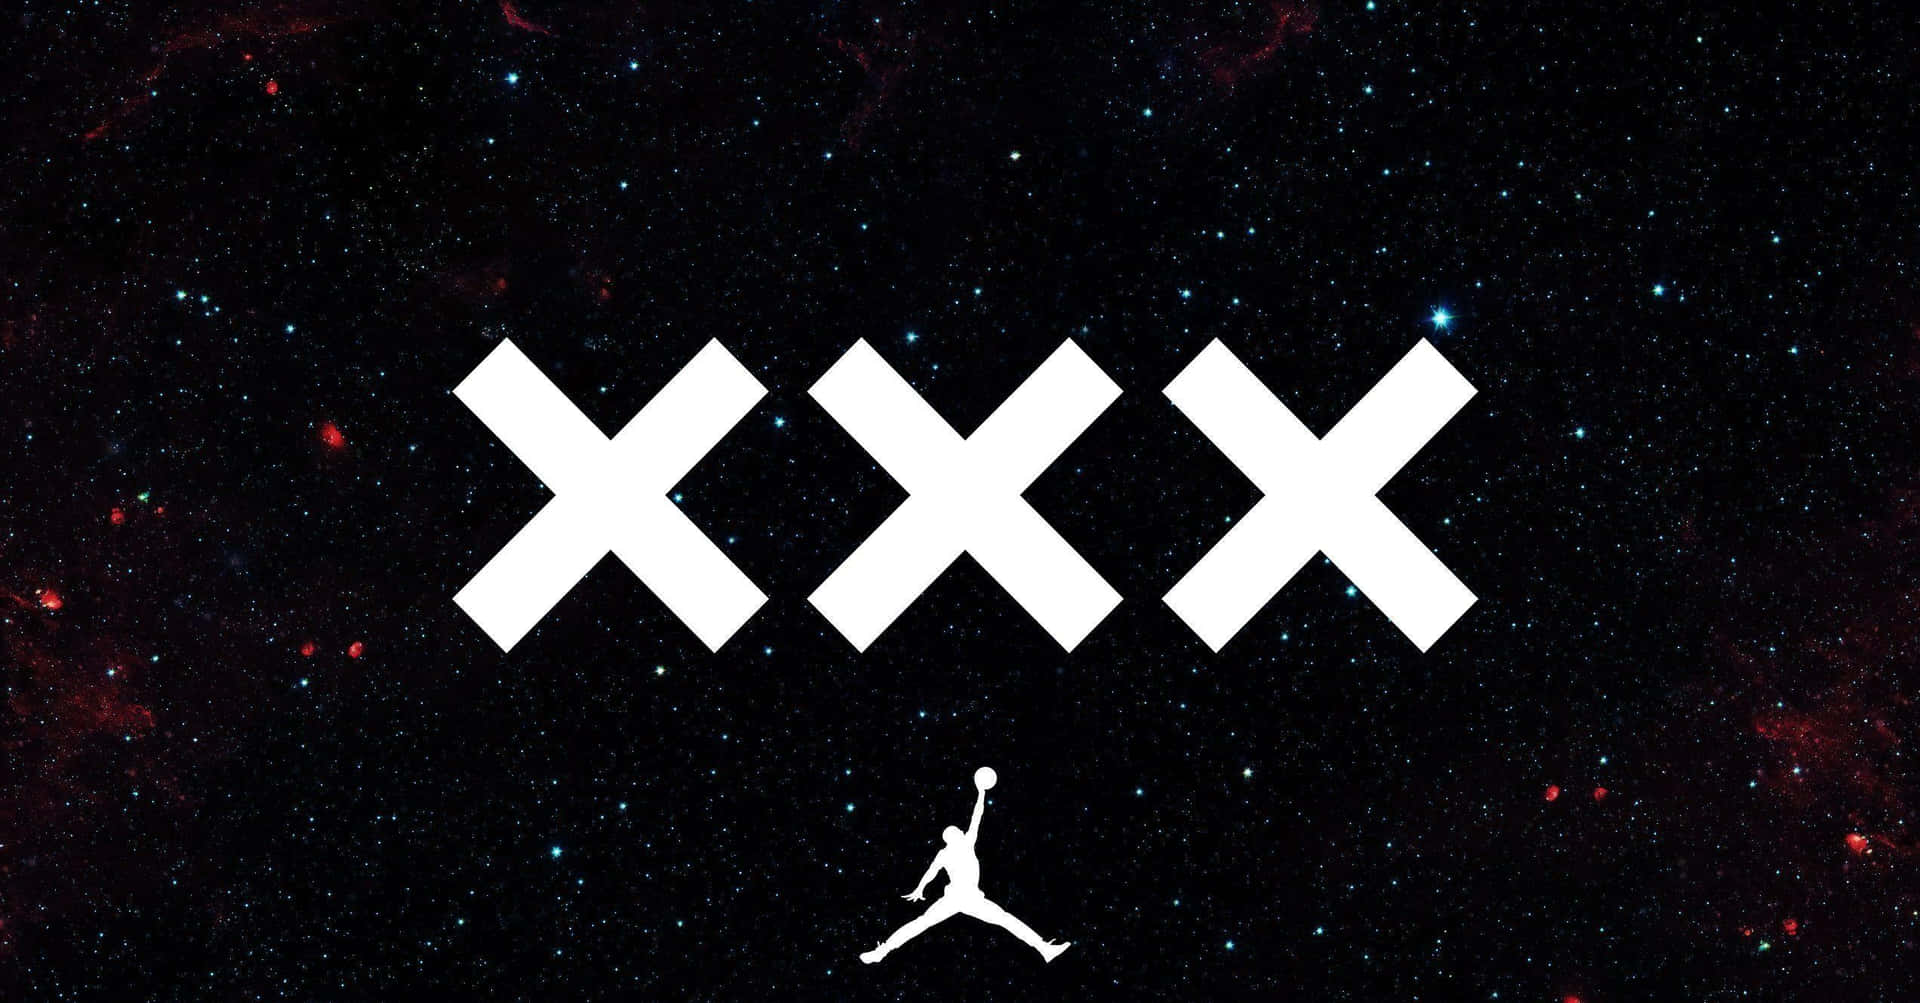 Jump above the rest, with the Nike Air Jordan Wallpaper